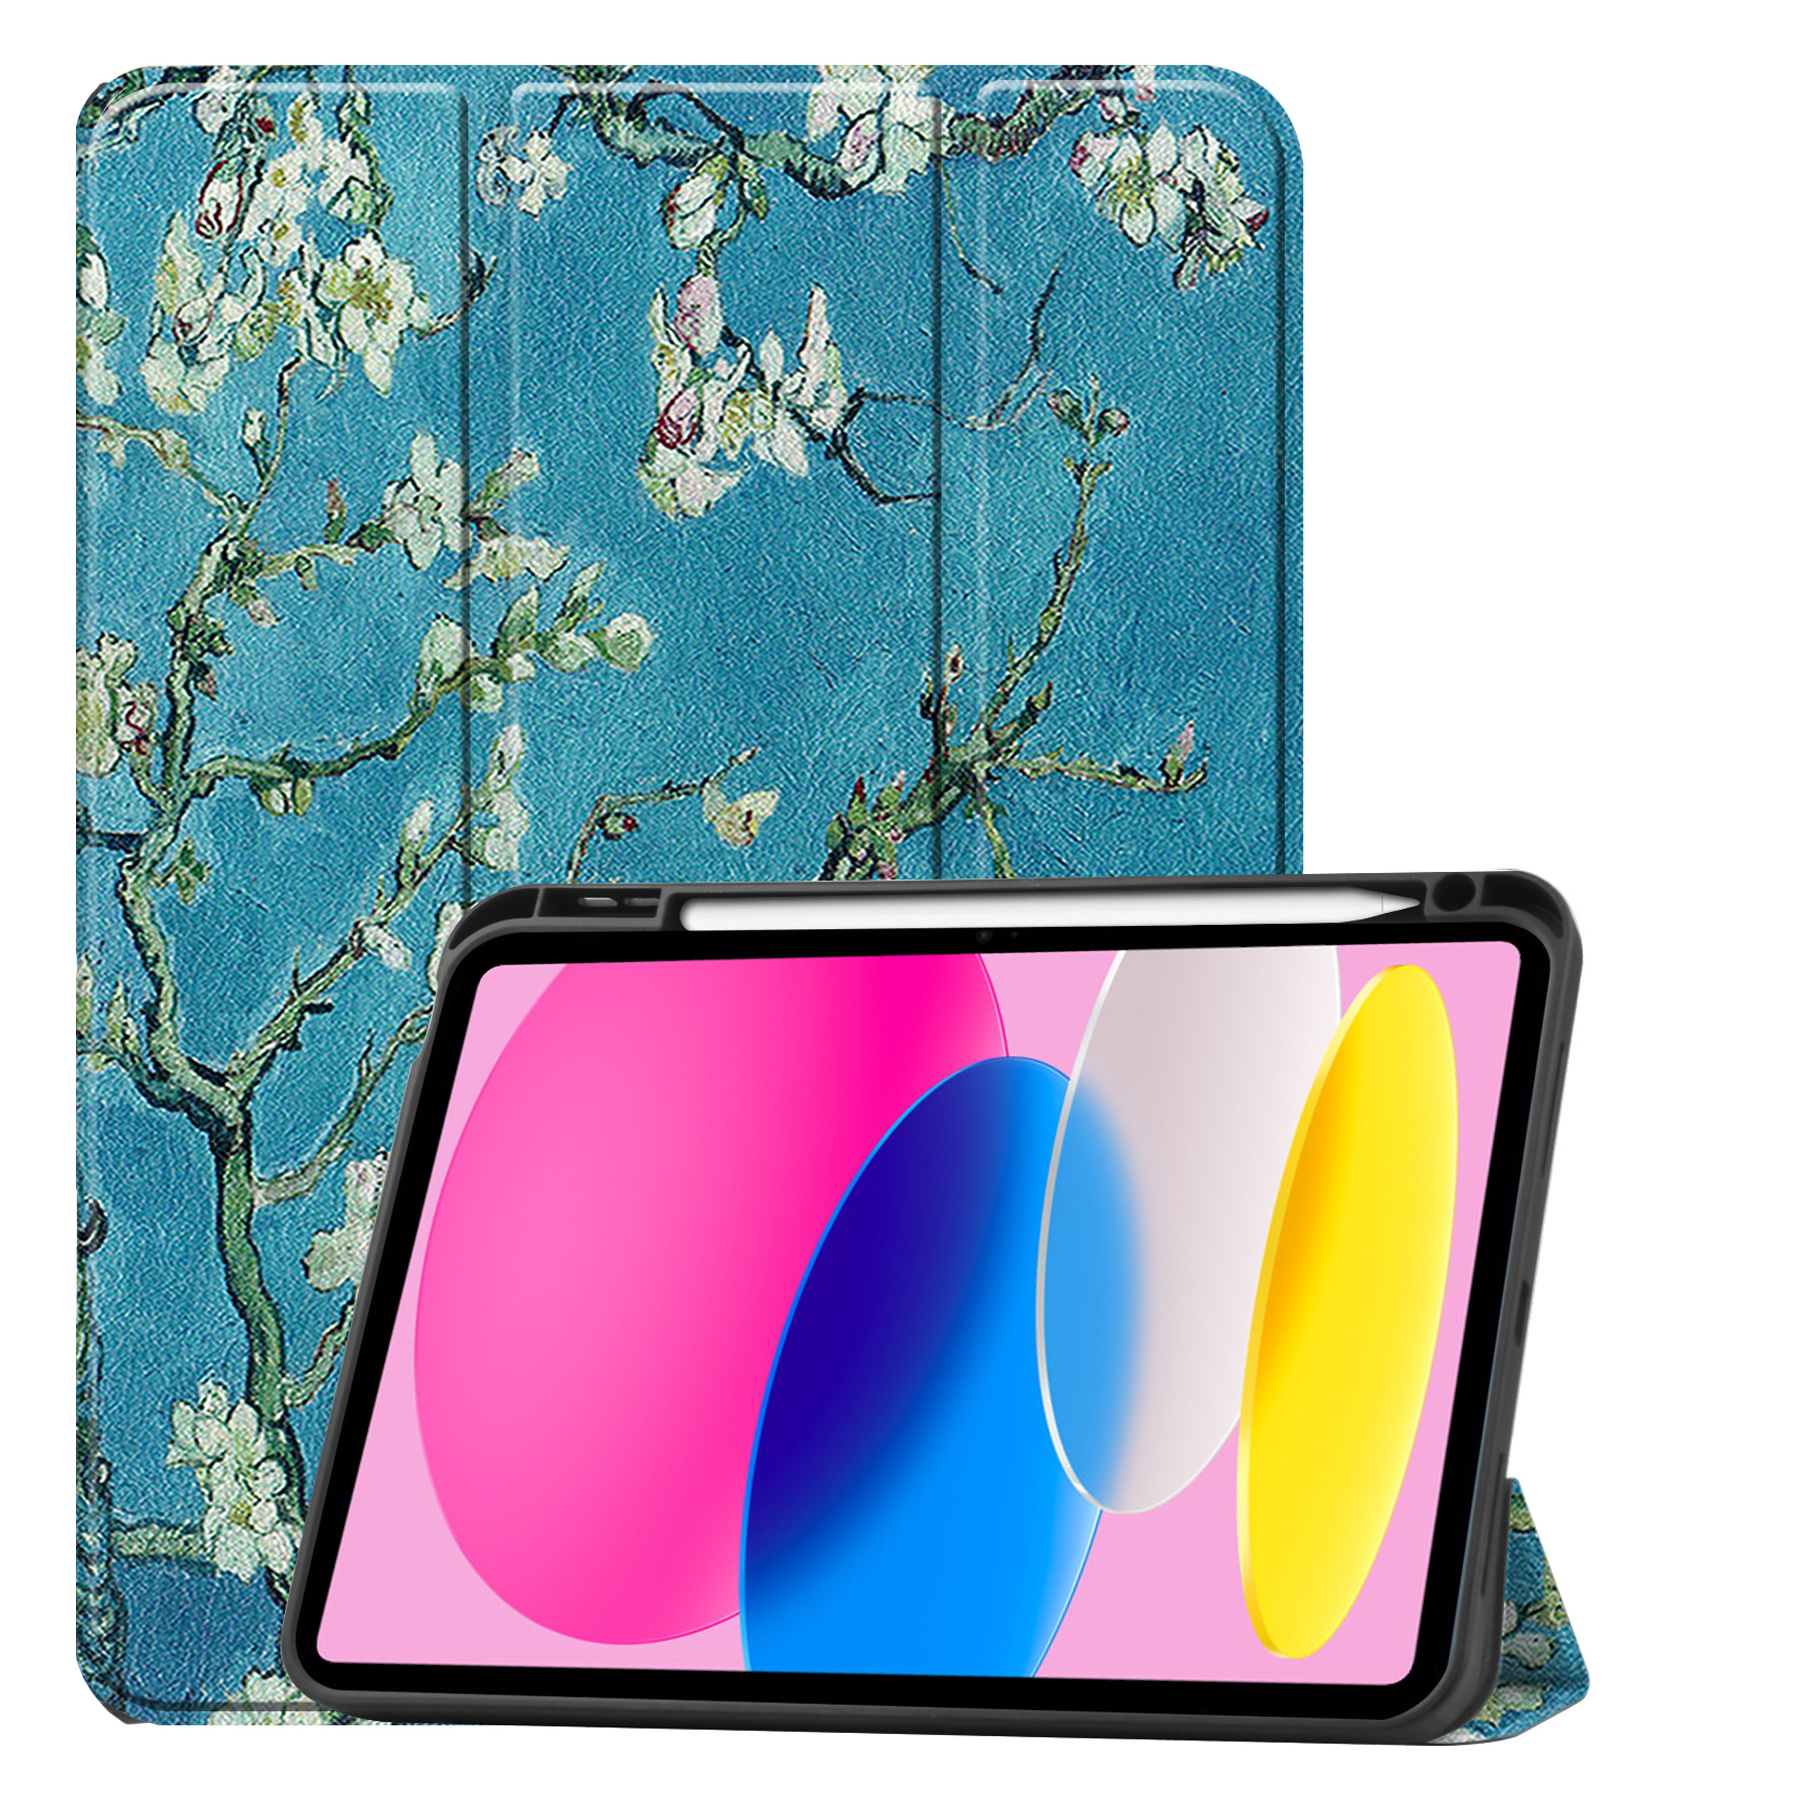 iPad 2022 Hoesje Book Case Hard Cover Hoes Met Uitsparing Apple Pencil - iPad 10 Hoes Hardcover - Bloesem